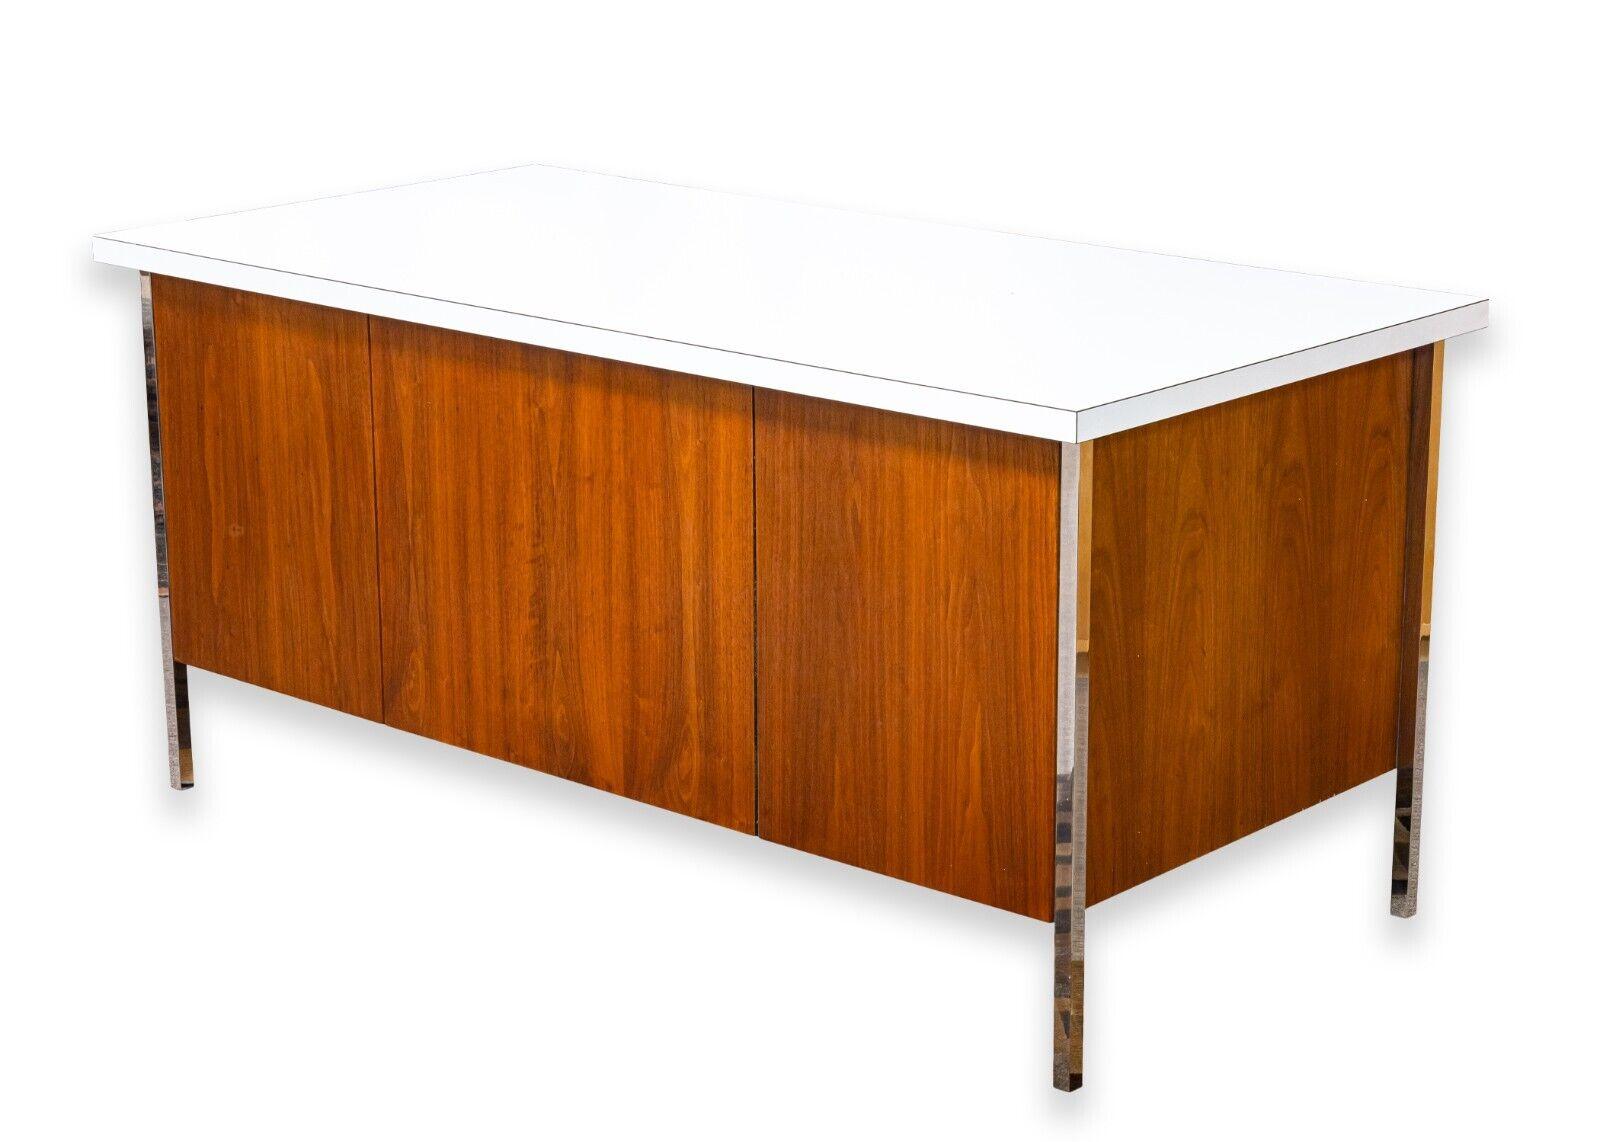 A Knoll walnut double pedestal desk. This is a gorgeous office desk, perfect for a mid century home or office. It features a classic, simple design, and a choice set of materials. This desk is constructed with a gorgeous walnut wood with beautiful